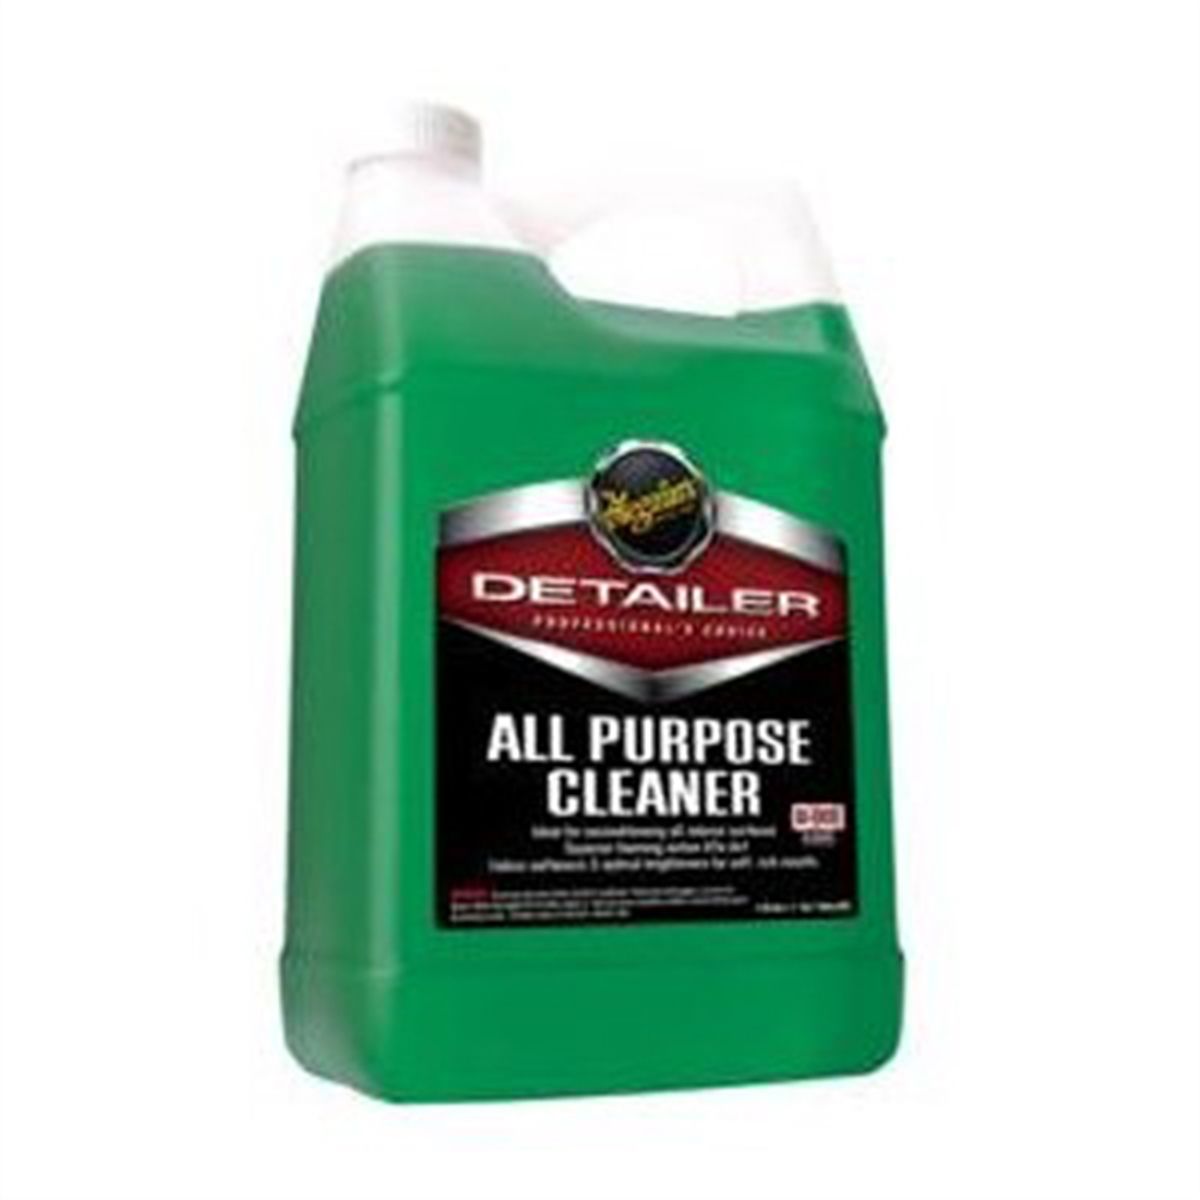 All Purpose Cleaner 5 Gal